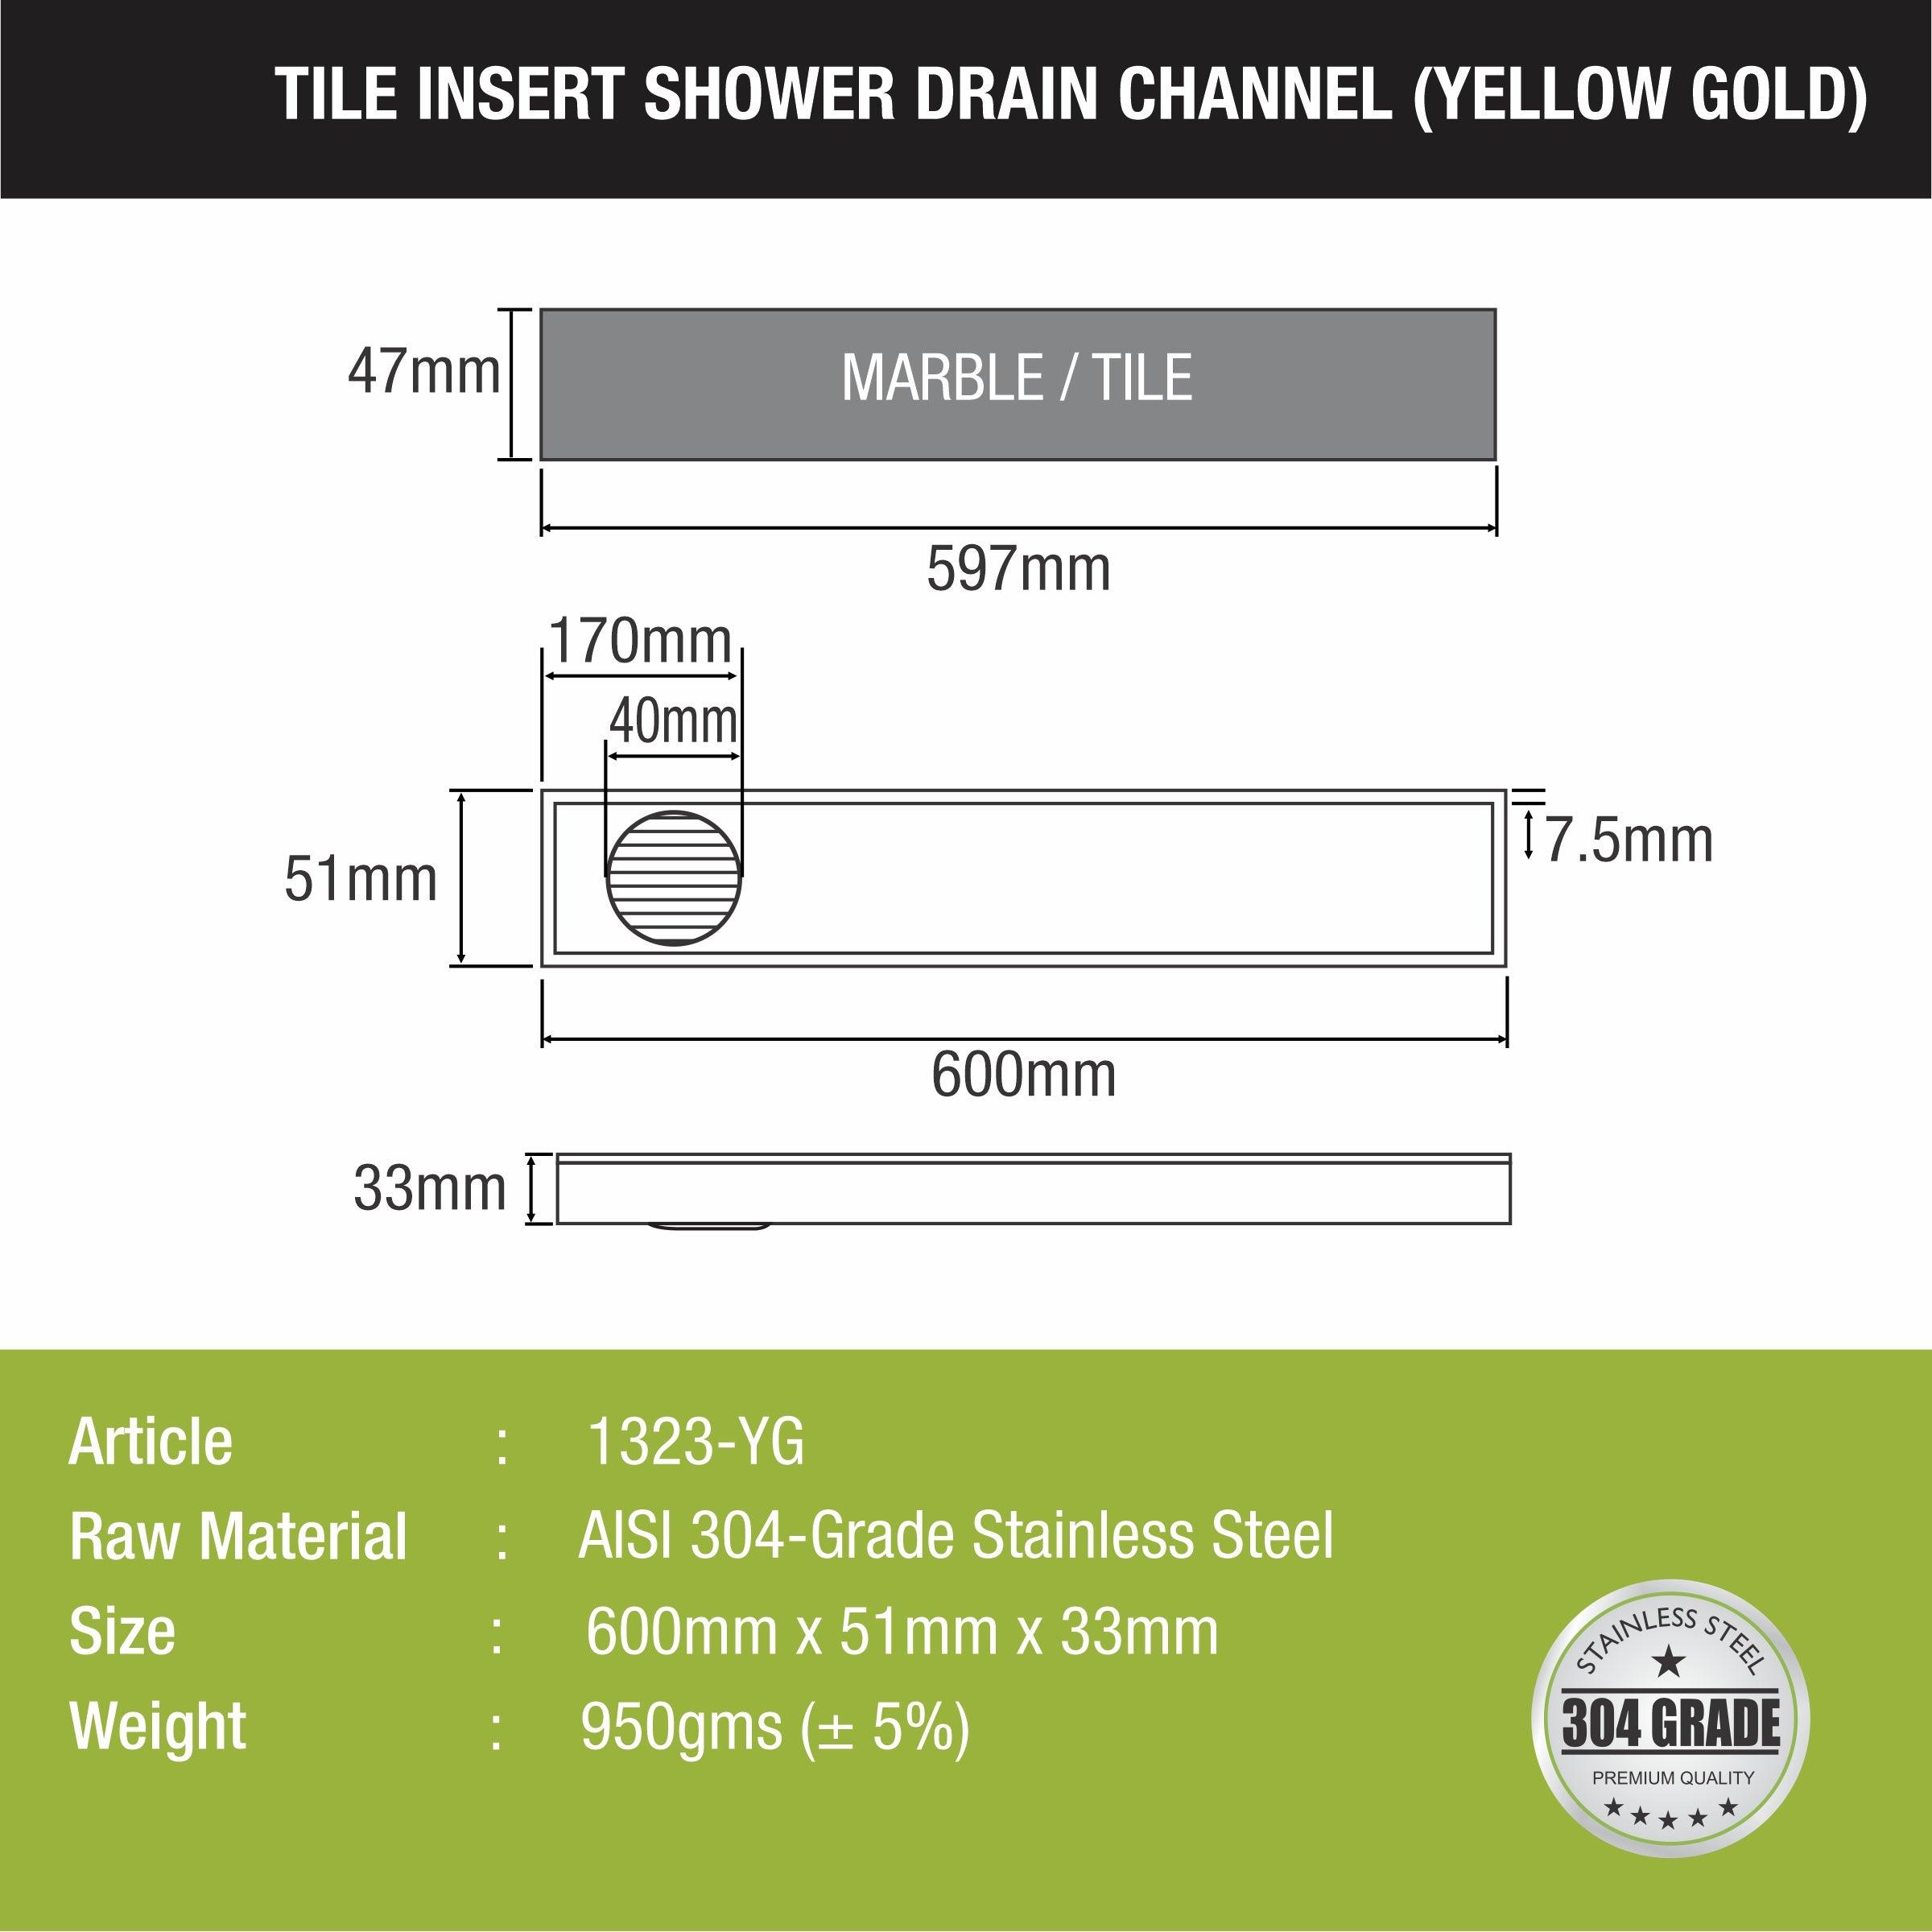 Tile Insert Shower Drain Channel - Yellow Gold (24 x 2 Inches) sizes and dimensions